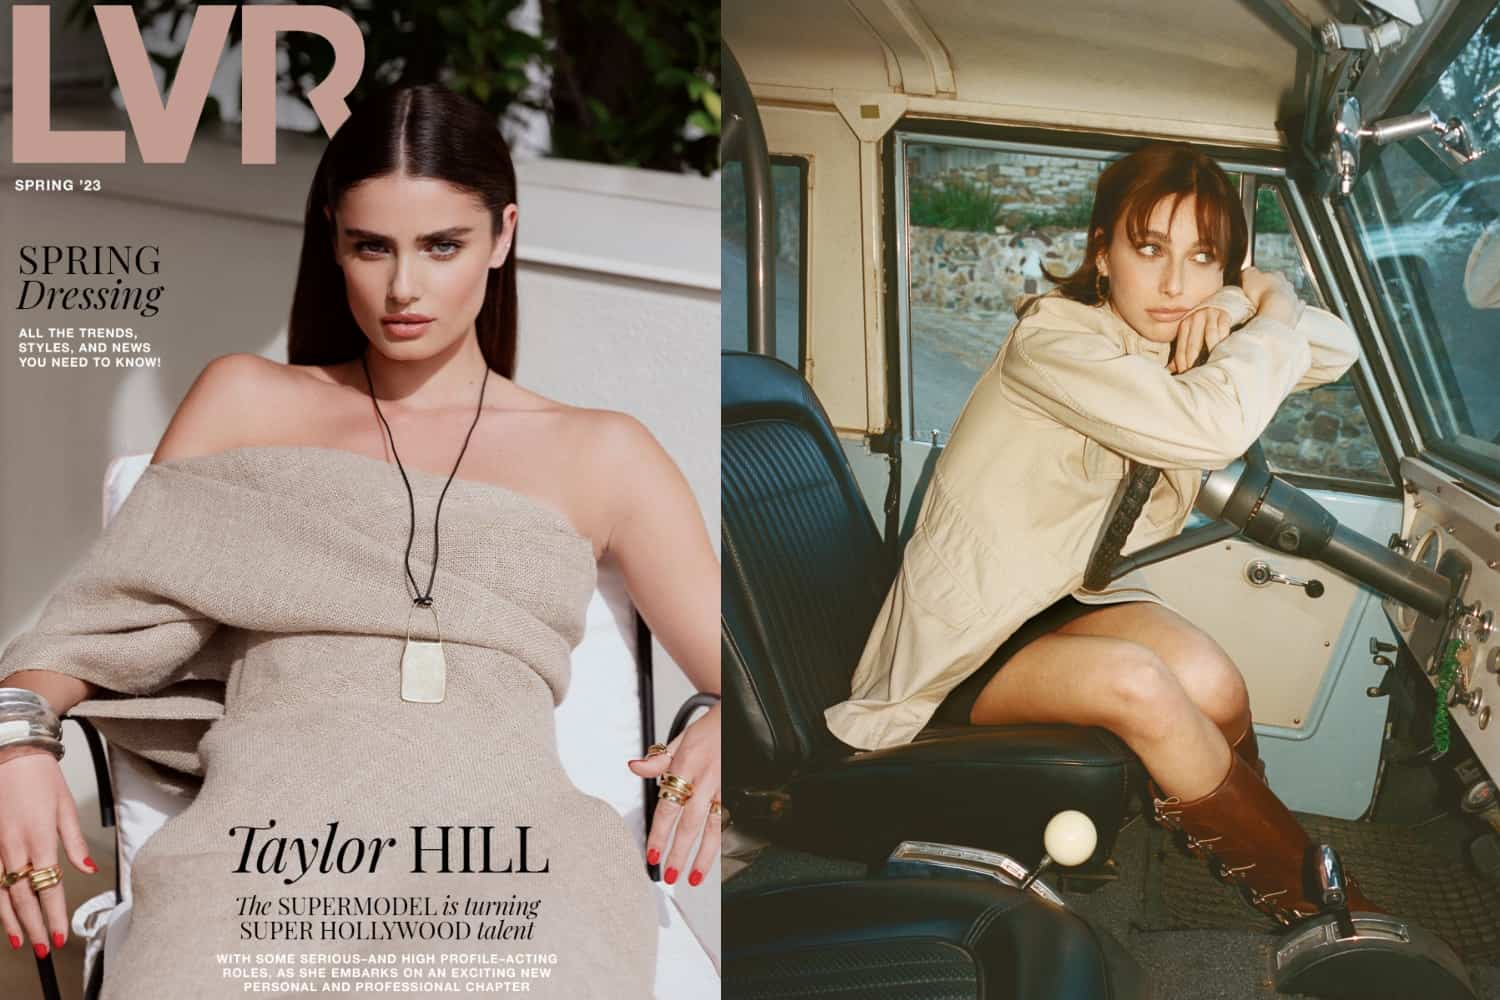 Taylor Hill Is LVR Magazine's Stunning Spring Issue Cover Girl, Emma  Chamberlain's New Aritzia Campaign, And More!